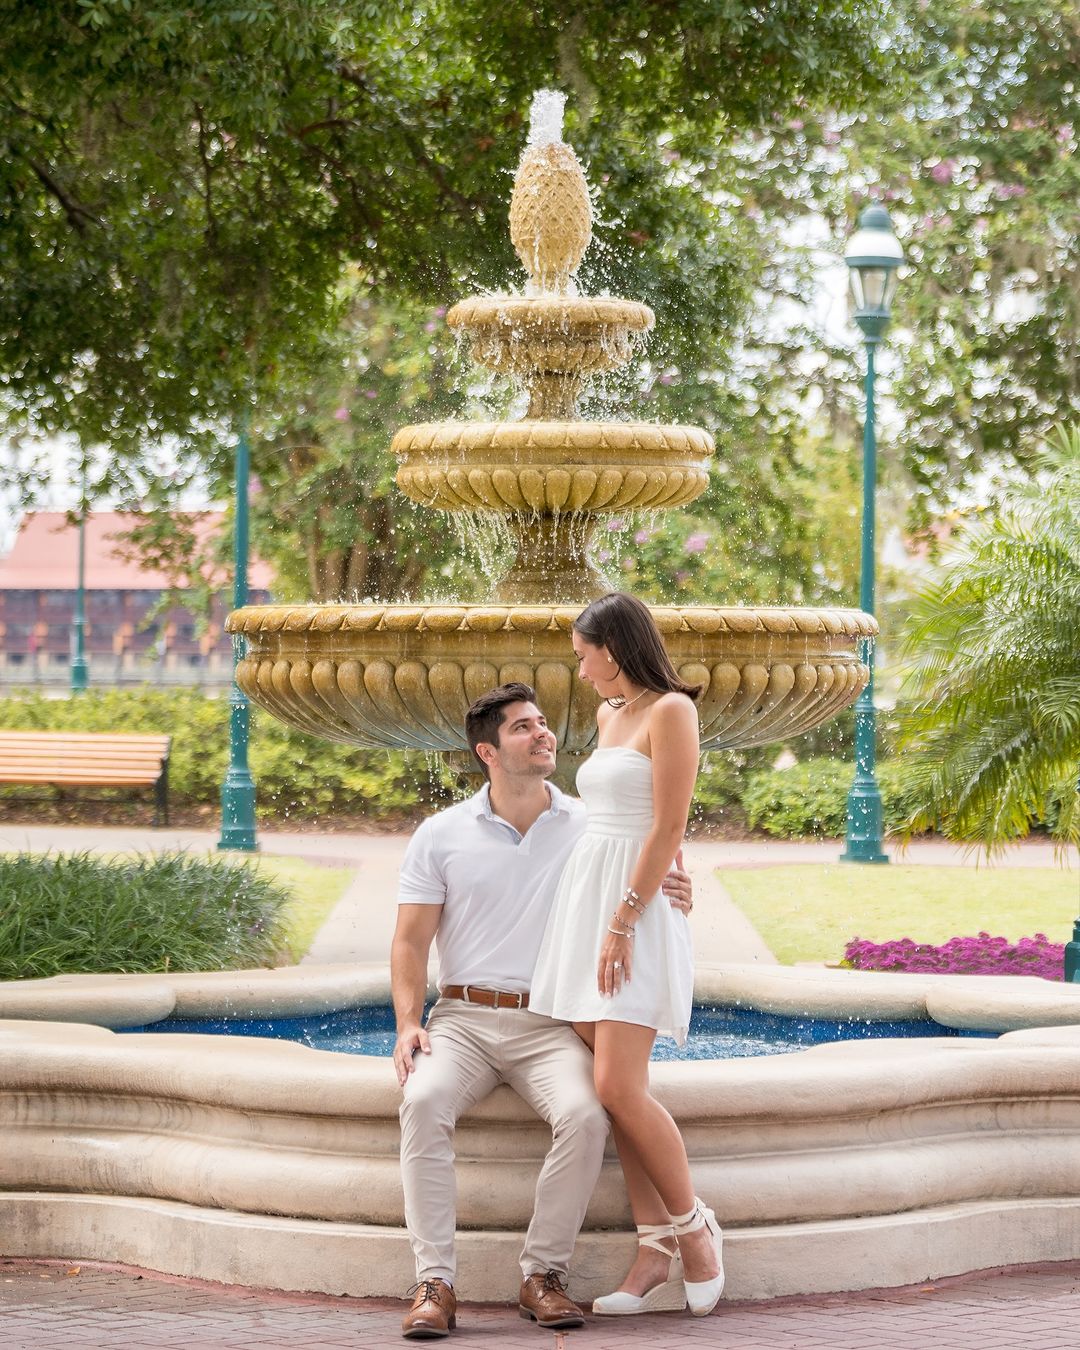 Captivating proposal moment: Girl in shock with her jaw dropped as he gets on his knee to ask the question, with the Disney castle in the background, creating an amazing photo shoot.